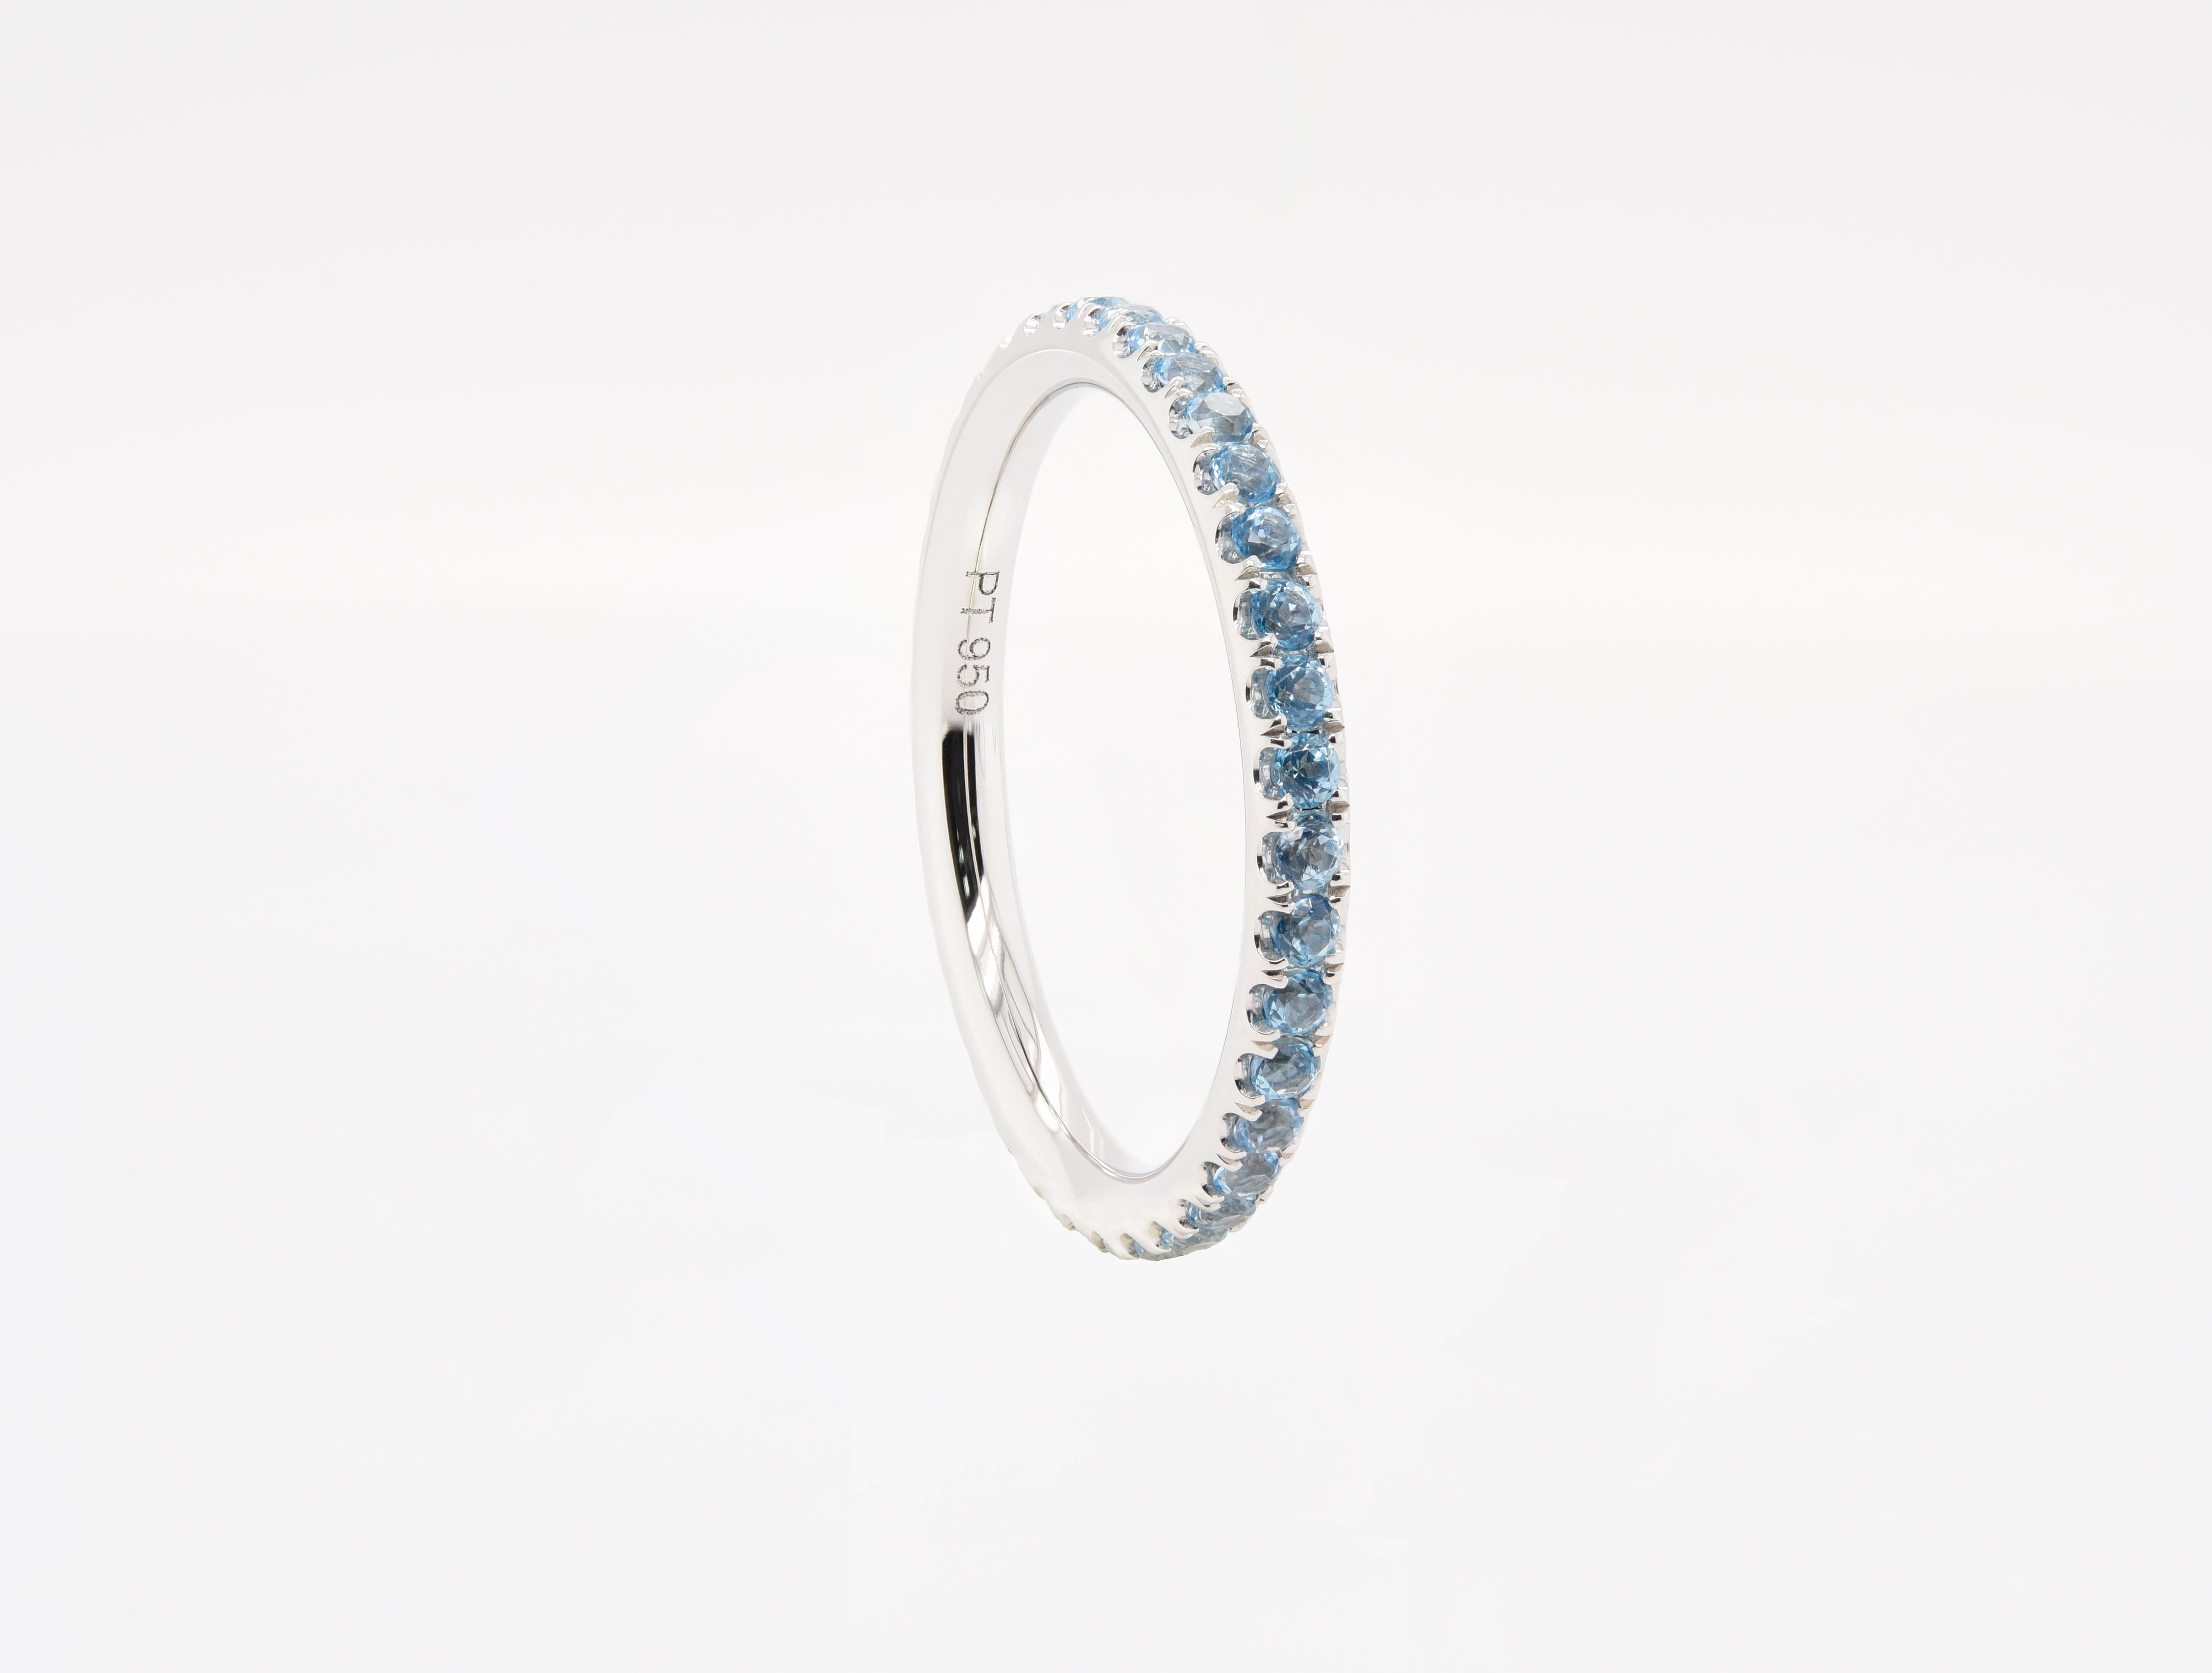 Artisan JAG New York Eternity Band with Your Choice of Diamonds and Gemstones For Sale